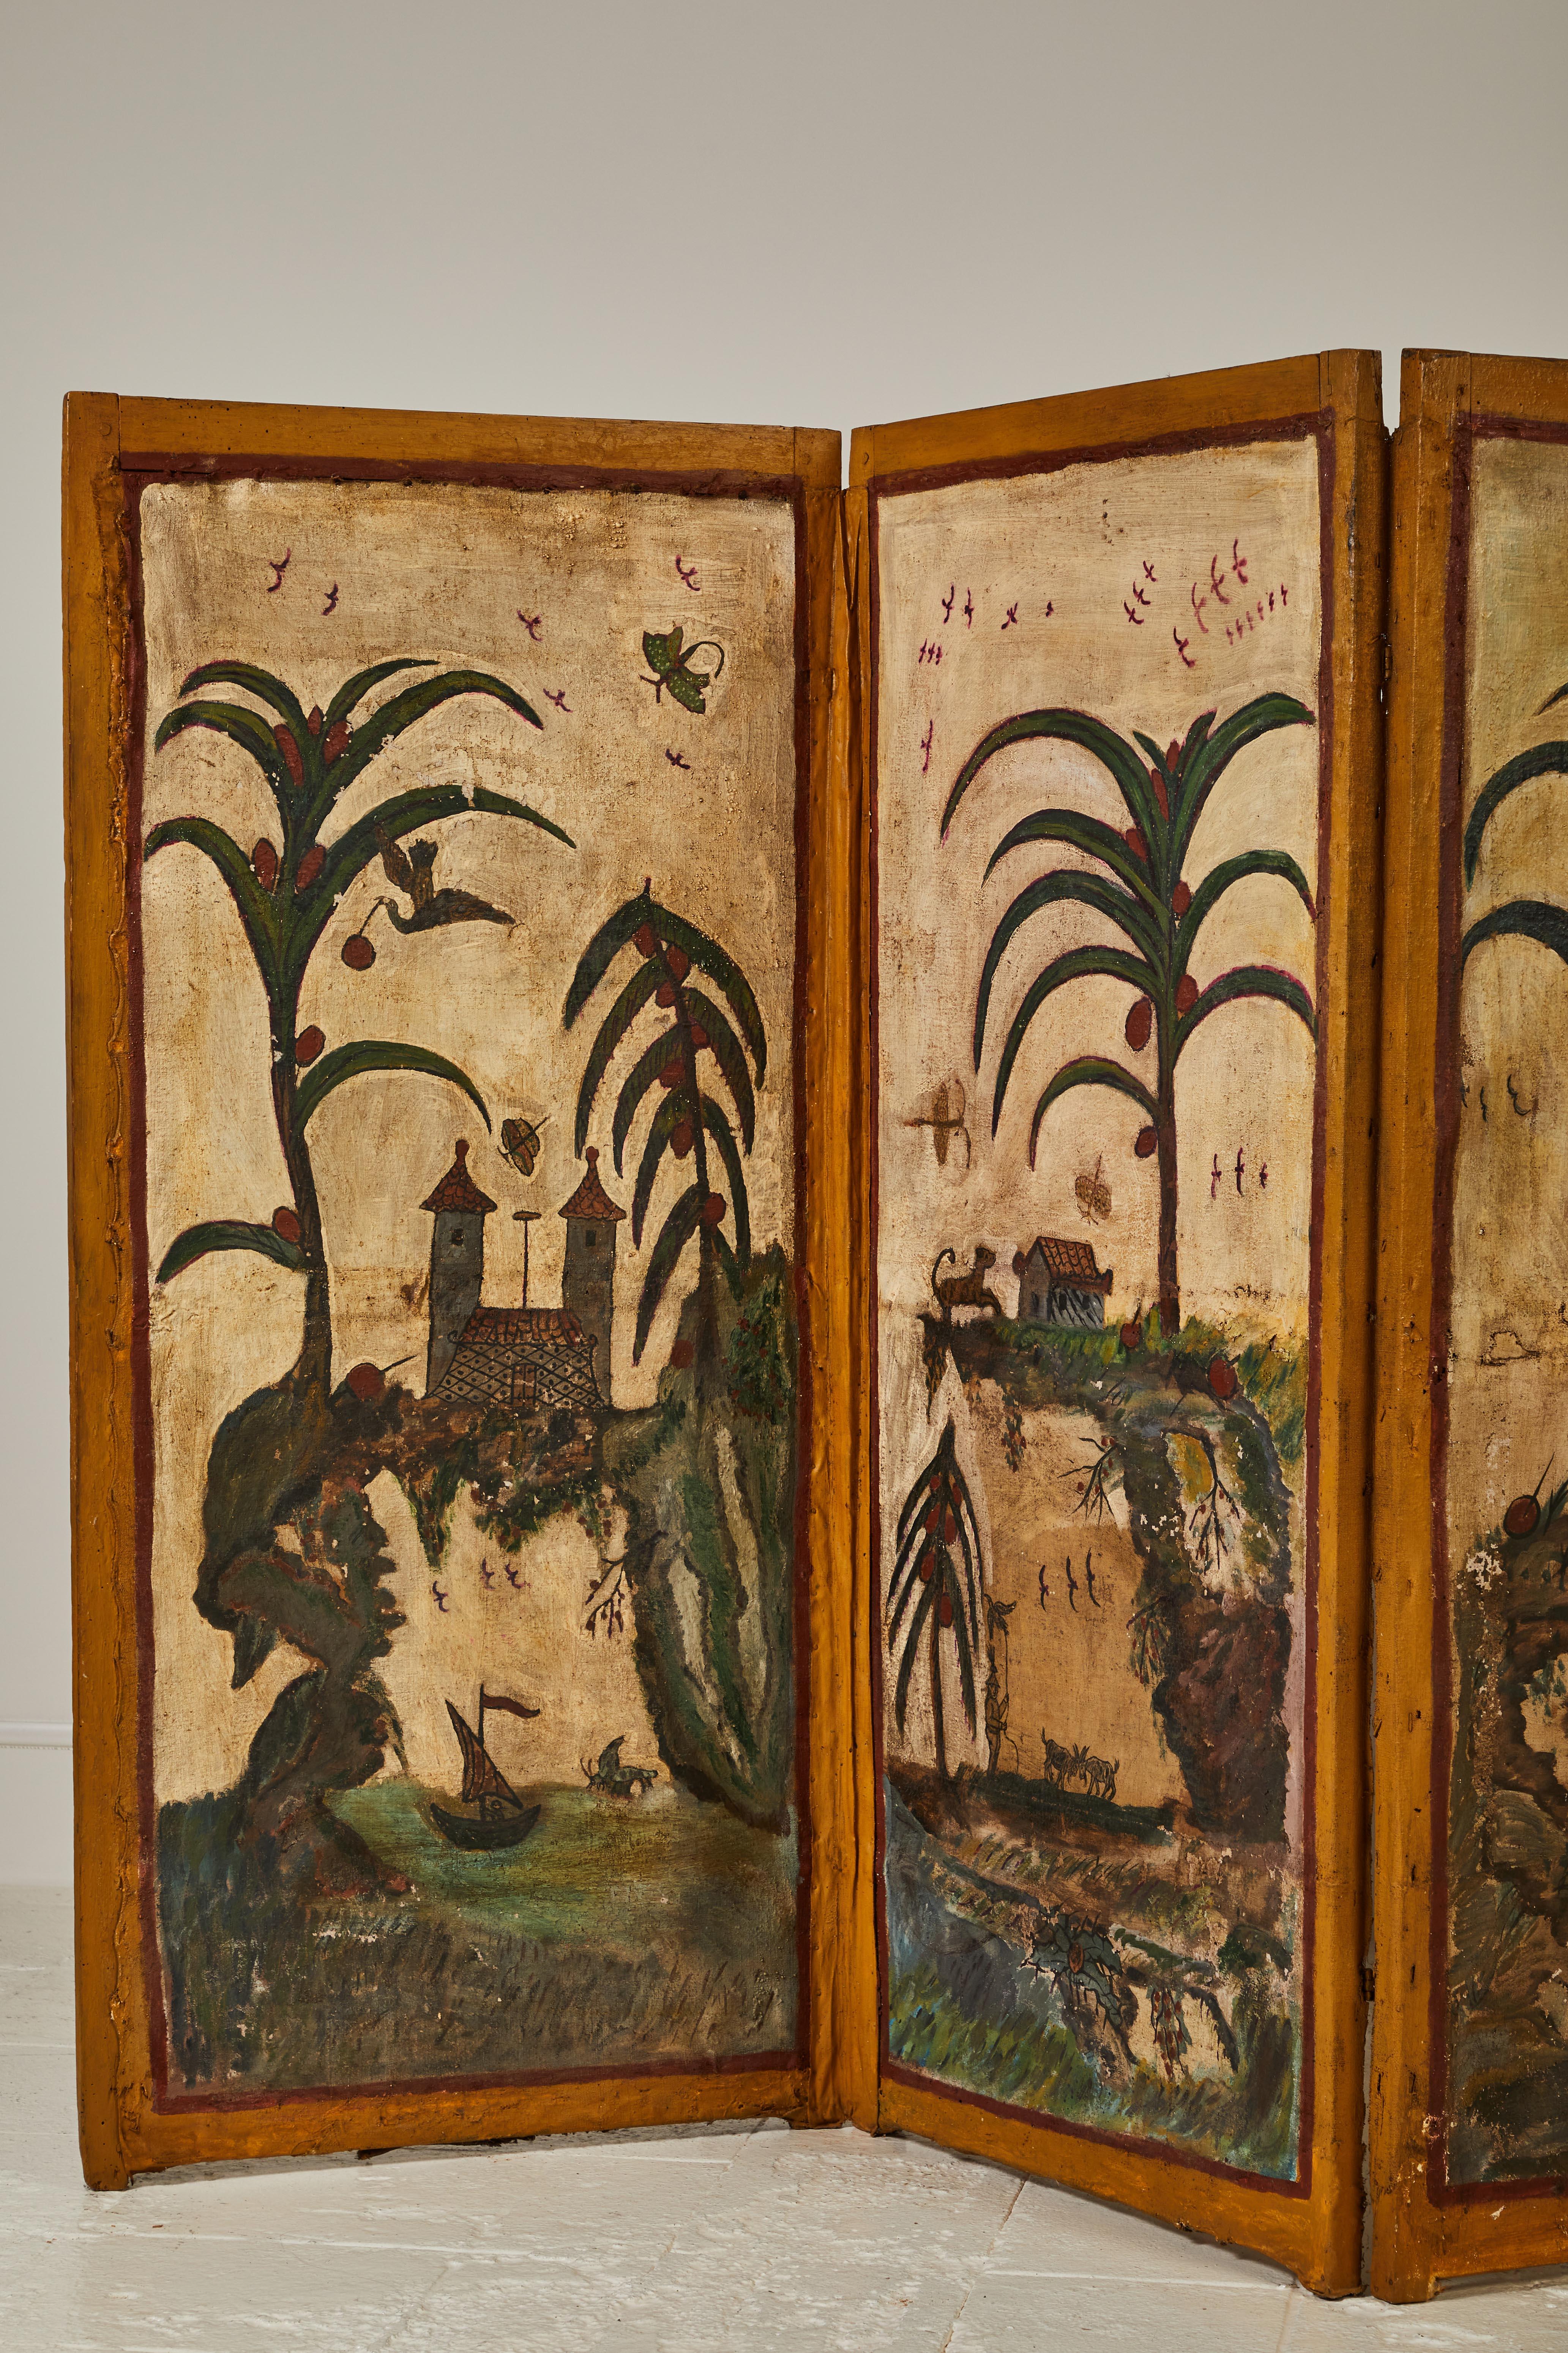 Beautifully hand painted five-panel screen. The screen exudes a sense of whimsy and wonder with the hand painted adventure scene. This screen is beautifully aged. Measurements are taken while the screen is flat. The screen can be stand alone or